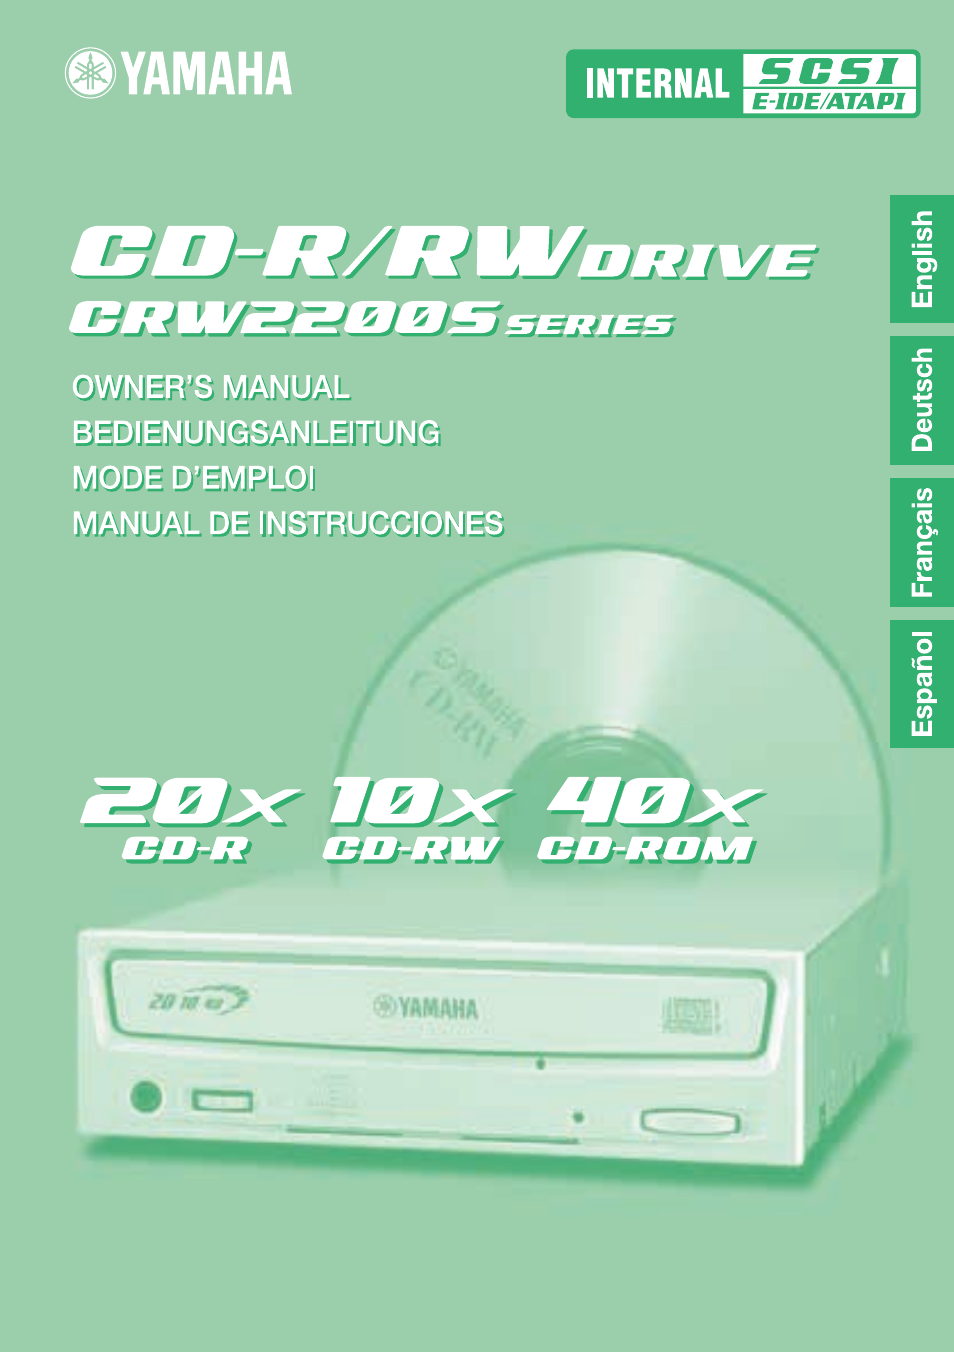 Yamaha CD Recordable/Rewritable Drive CRW2200S User Manual | 75 pages